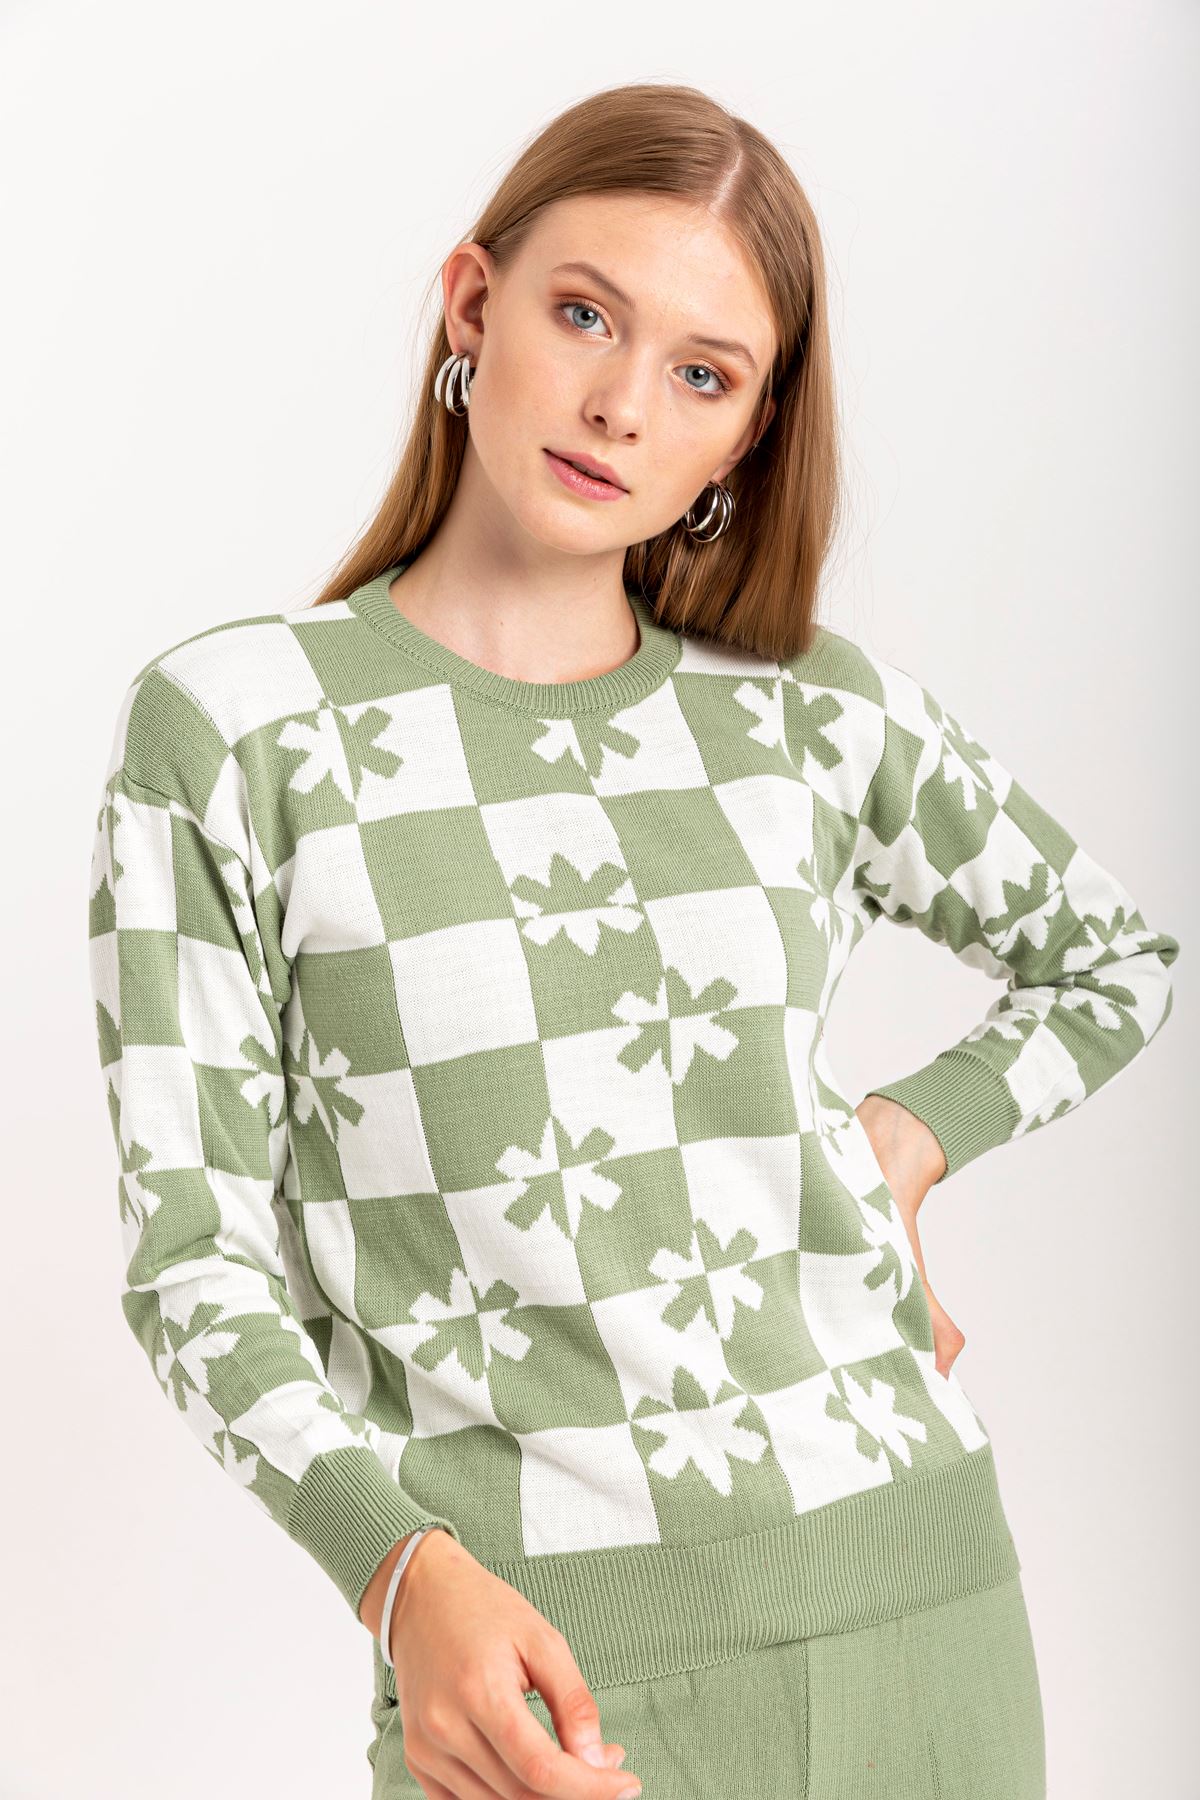 Knitwear Fabric Long Sleeve Bicycle Collar Checkerboard Print Women'S Knitwear Set 2 Pieces - Mint